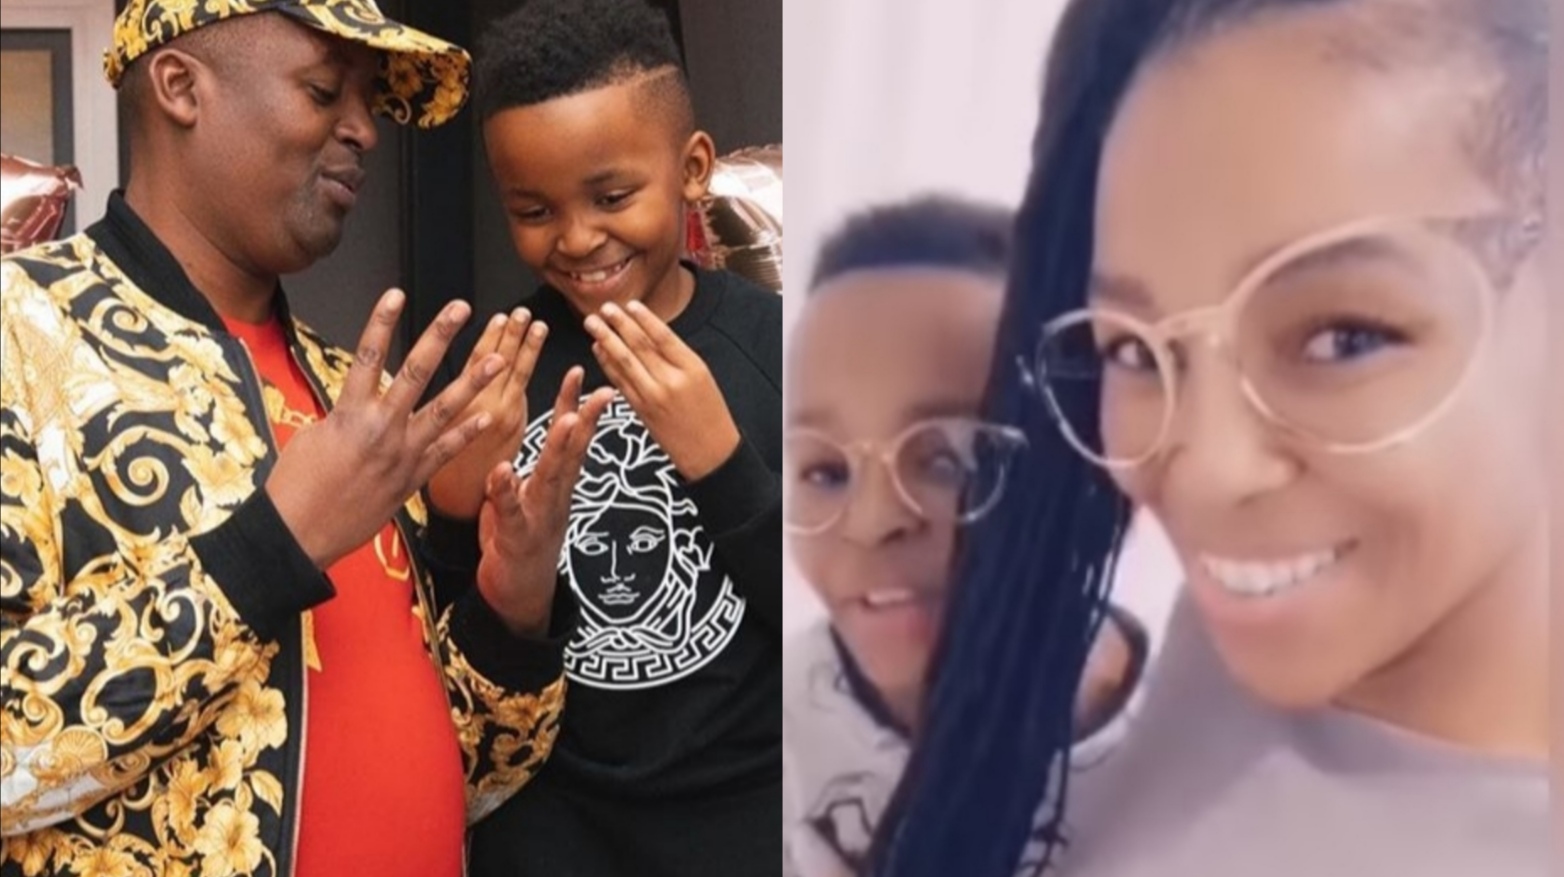 Nhlanhla And TK Nciza Throw Separate Parties For Their Son's 8th Birthday